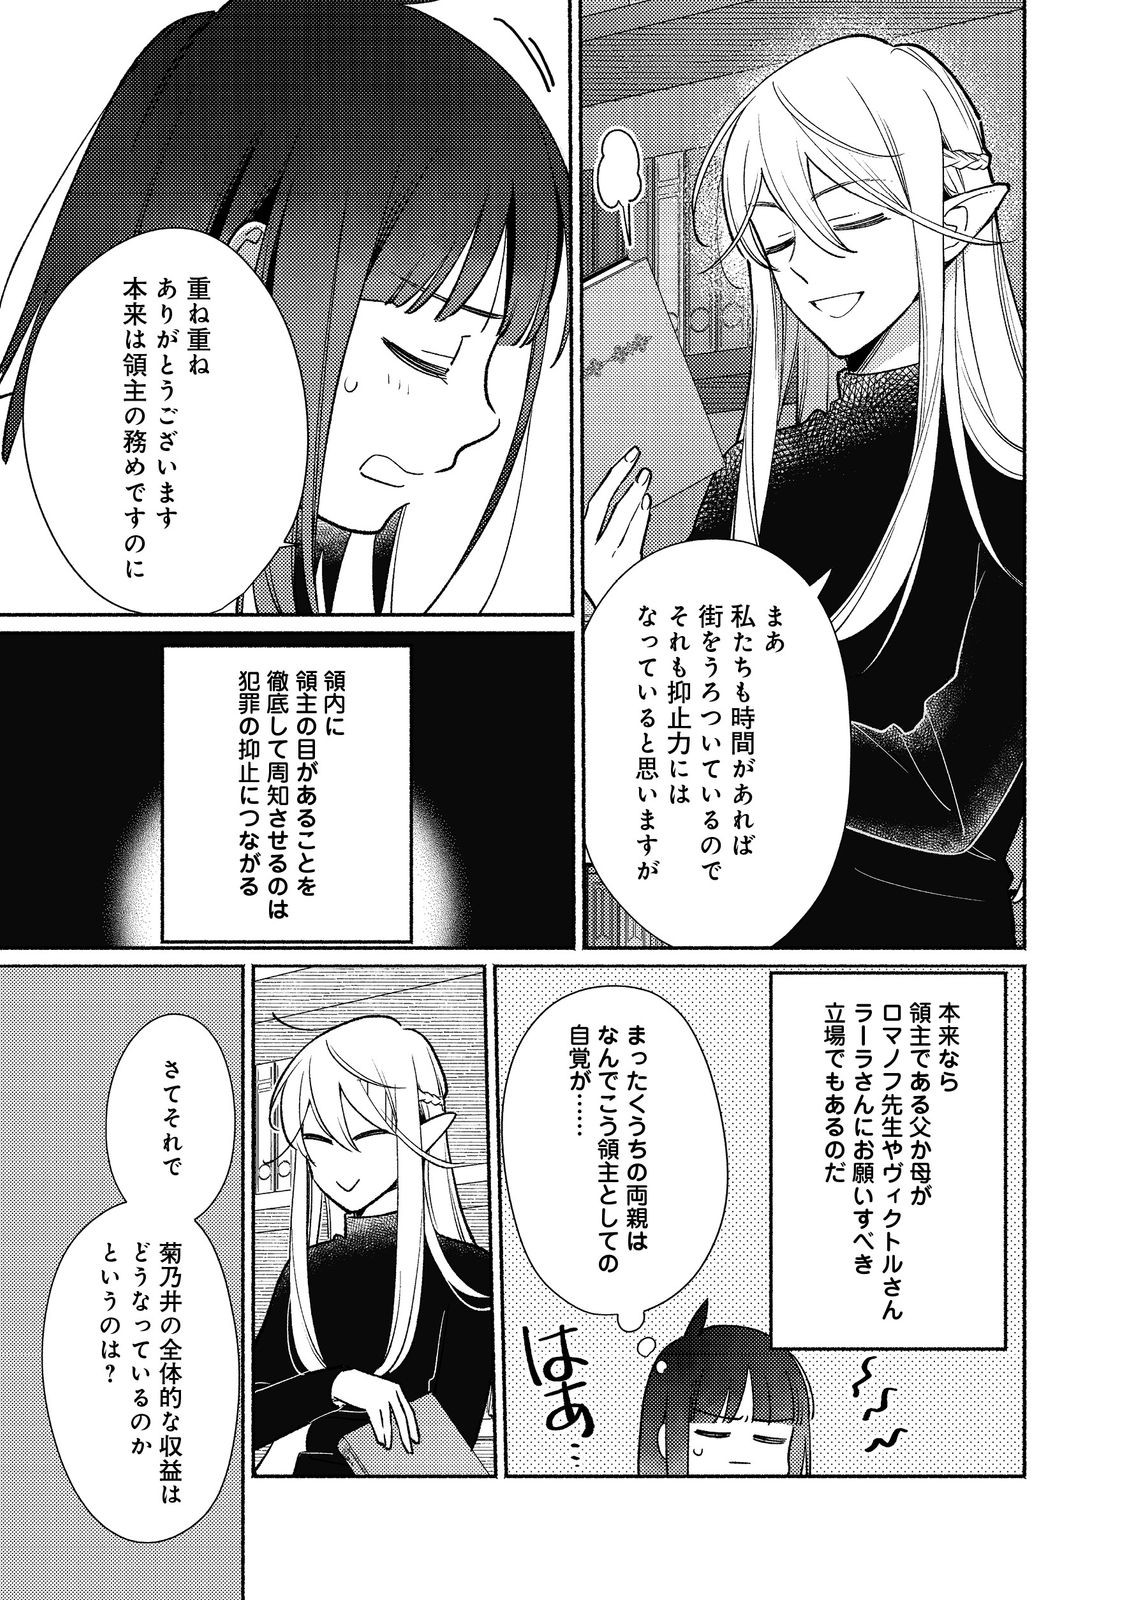 I’m the White Pig Nobleman 第24.2話 - Page 9